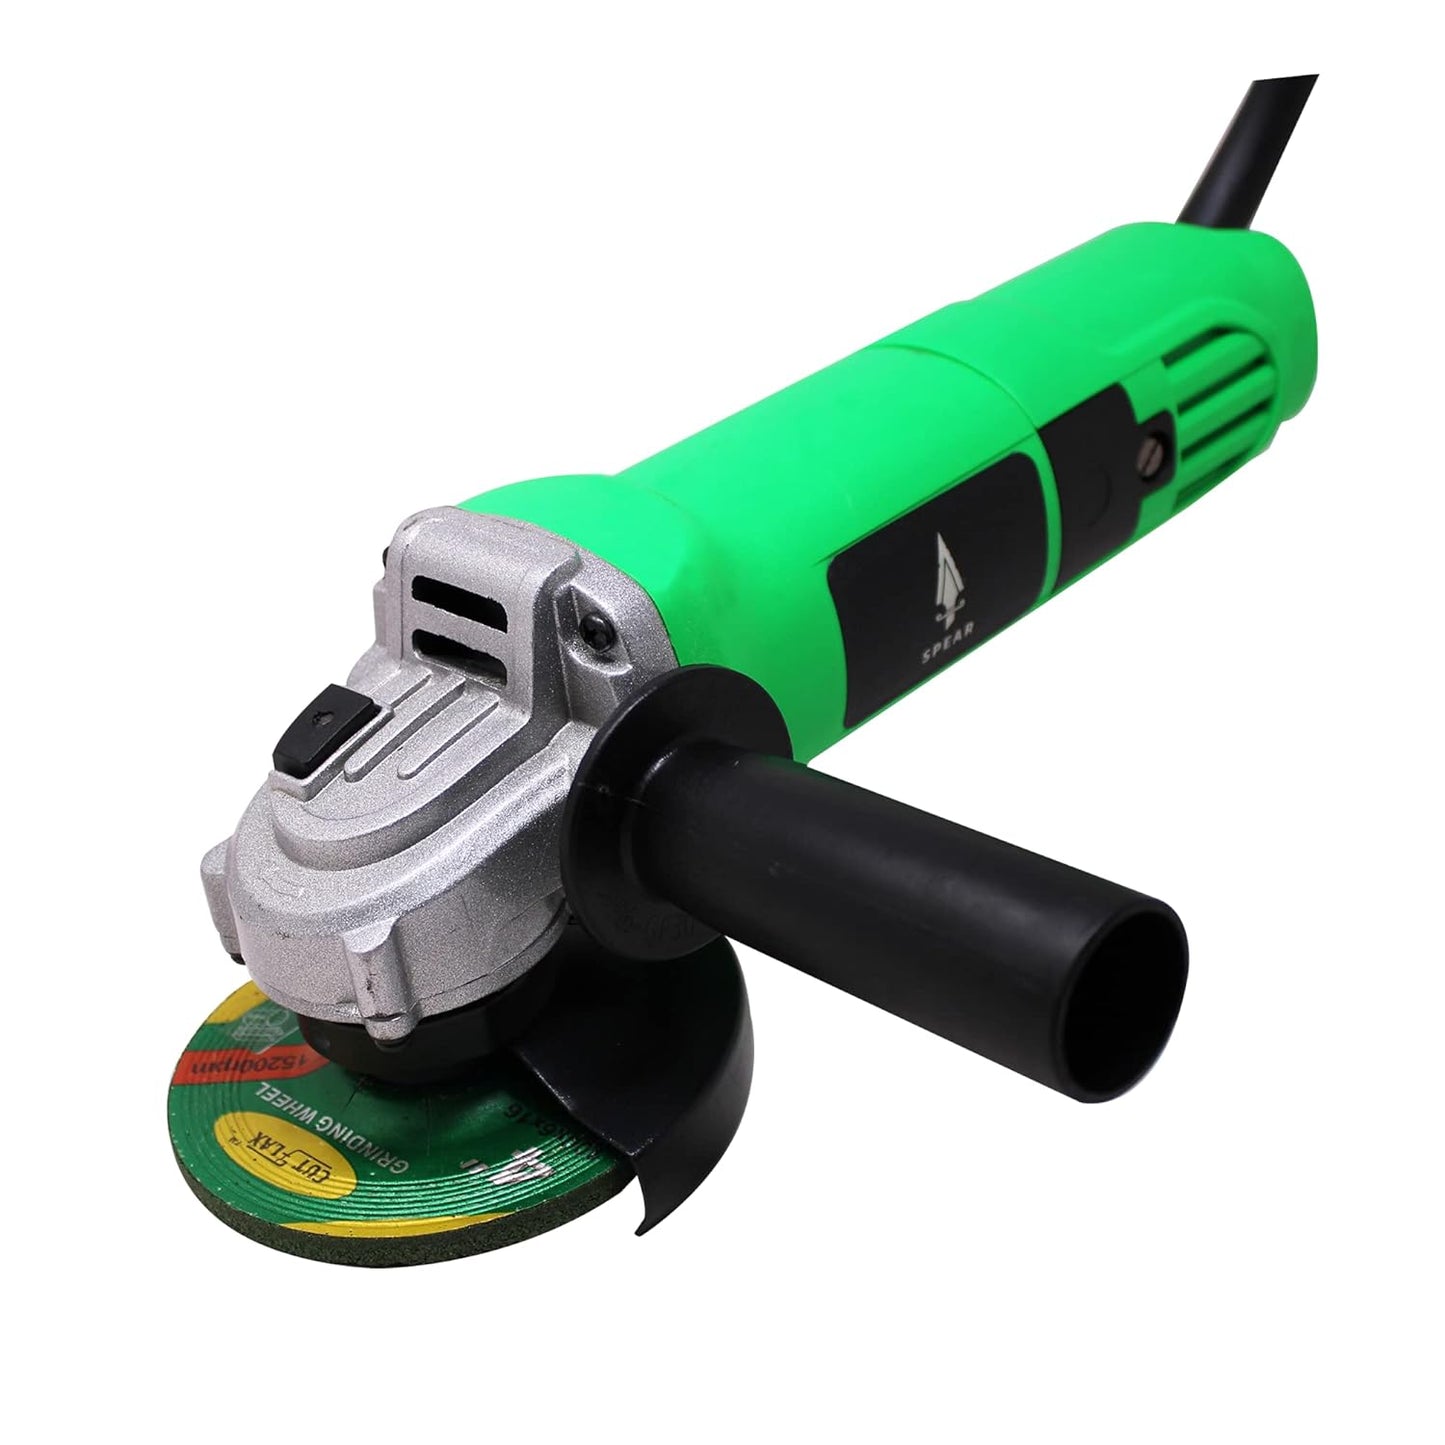 SPEAR SP-AG801 Heavy-Duty Angle Grinder for Grinding, Cutting, Sharpening, Polishing, Removing Rust (1200 W, 4 Inch, 11000 rpm)